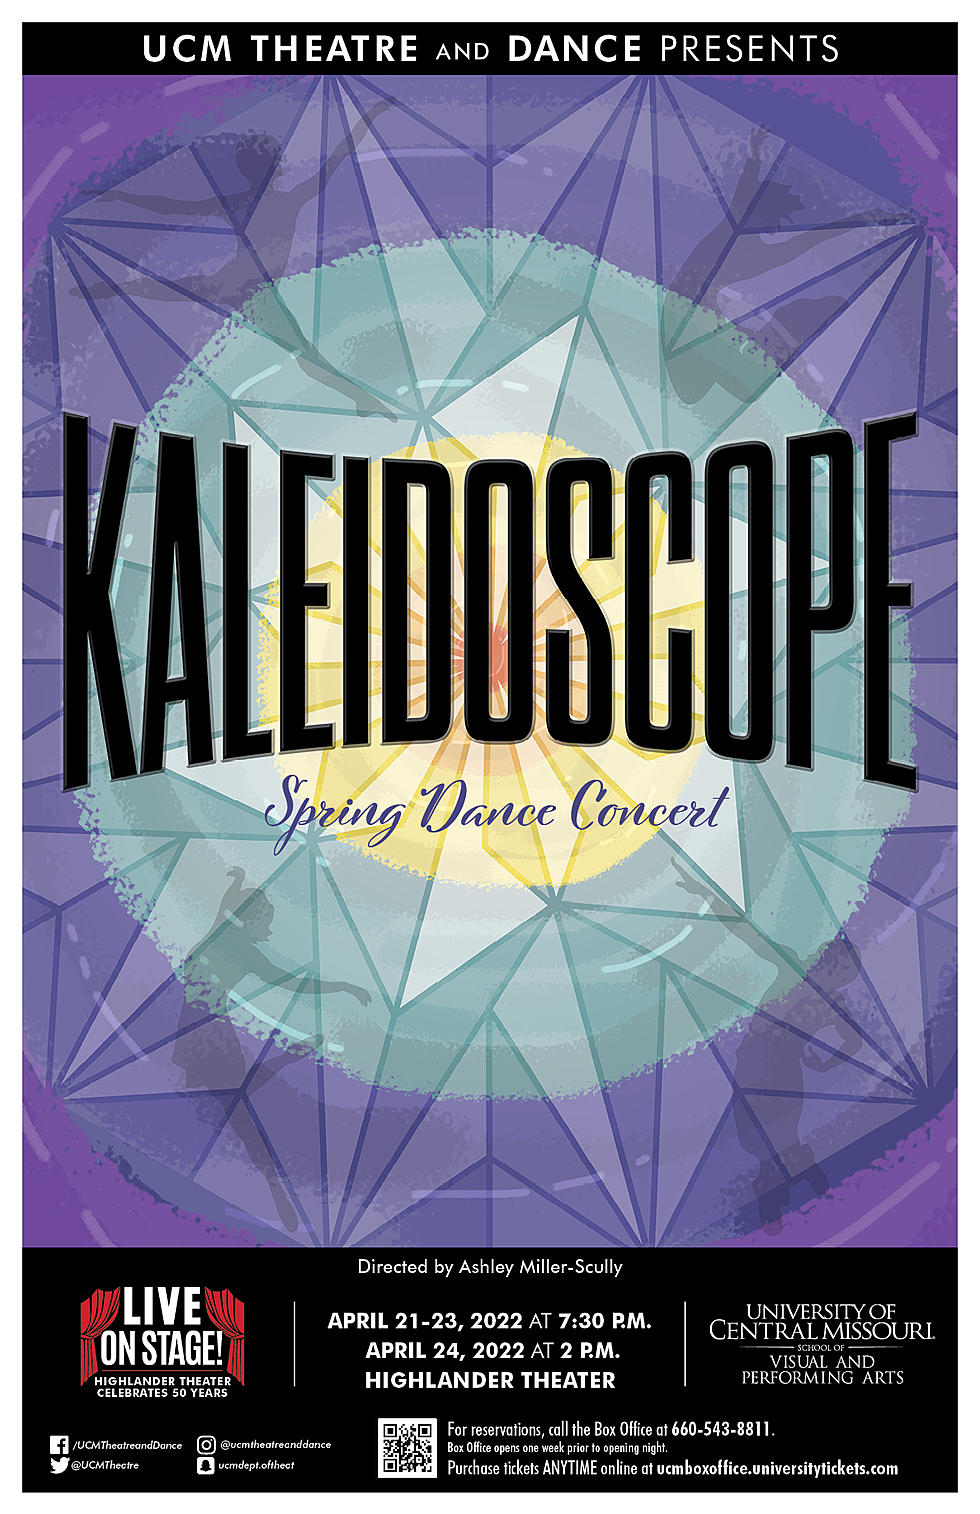 UCM Theatre To Present Kaleidoscope: A Spring Dance Concert